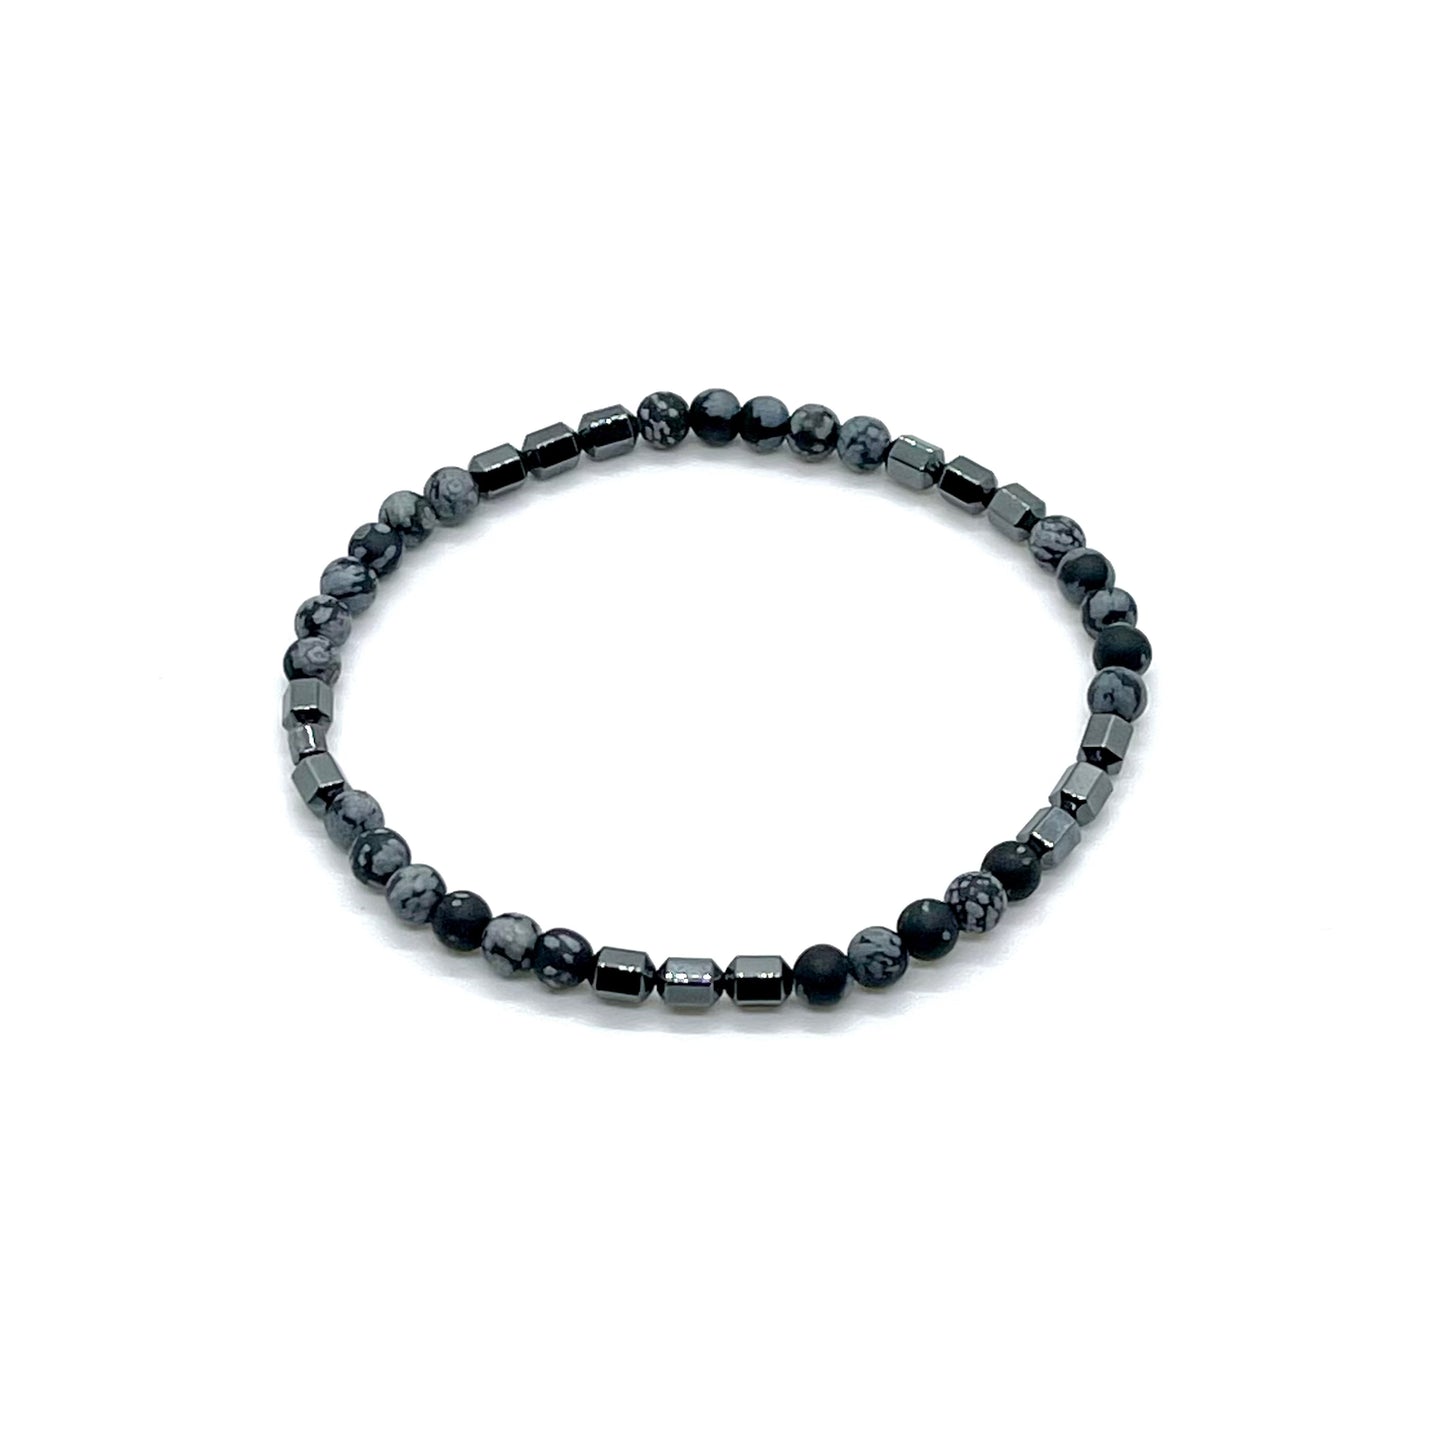 Men's obsidian bracelet with black and gray speckled beads and gunmetal hematite beads on elastic stretch cord.